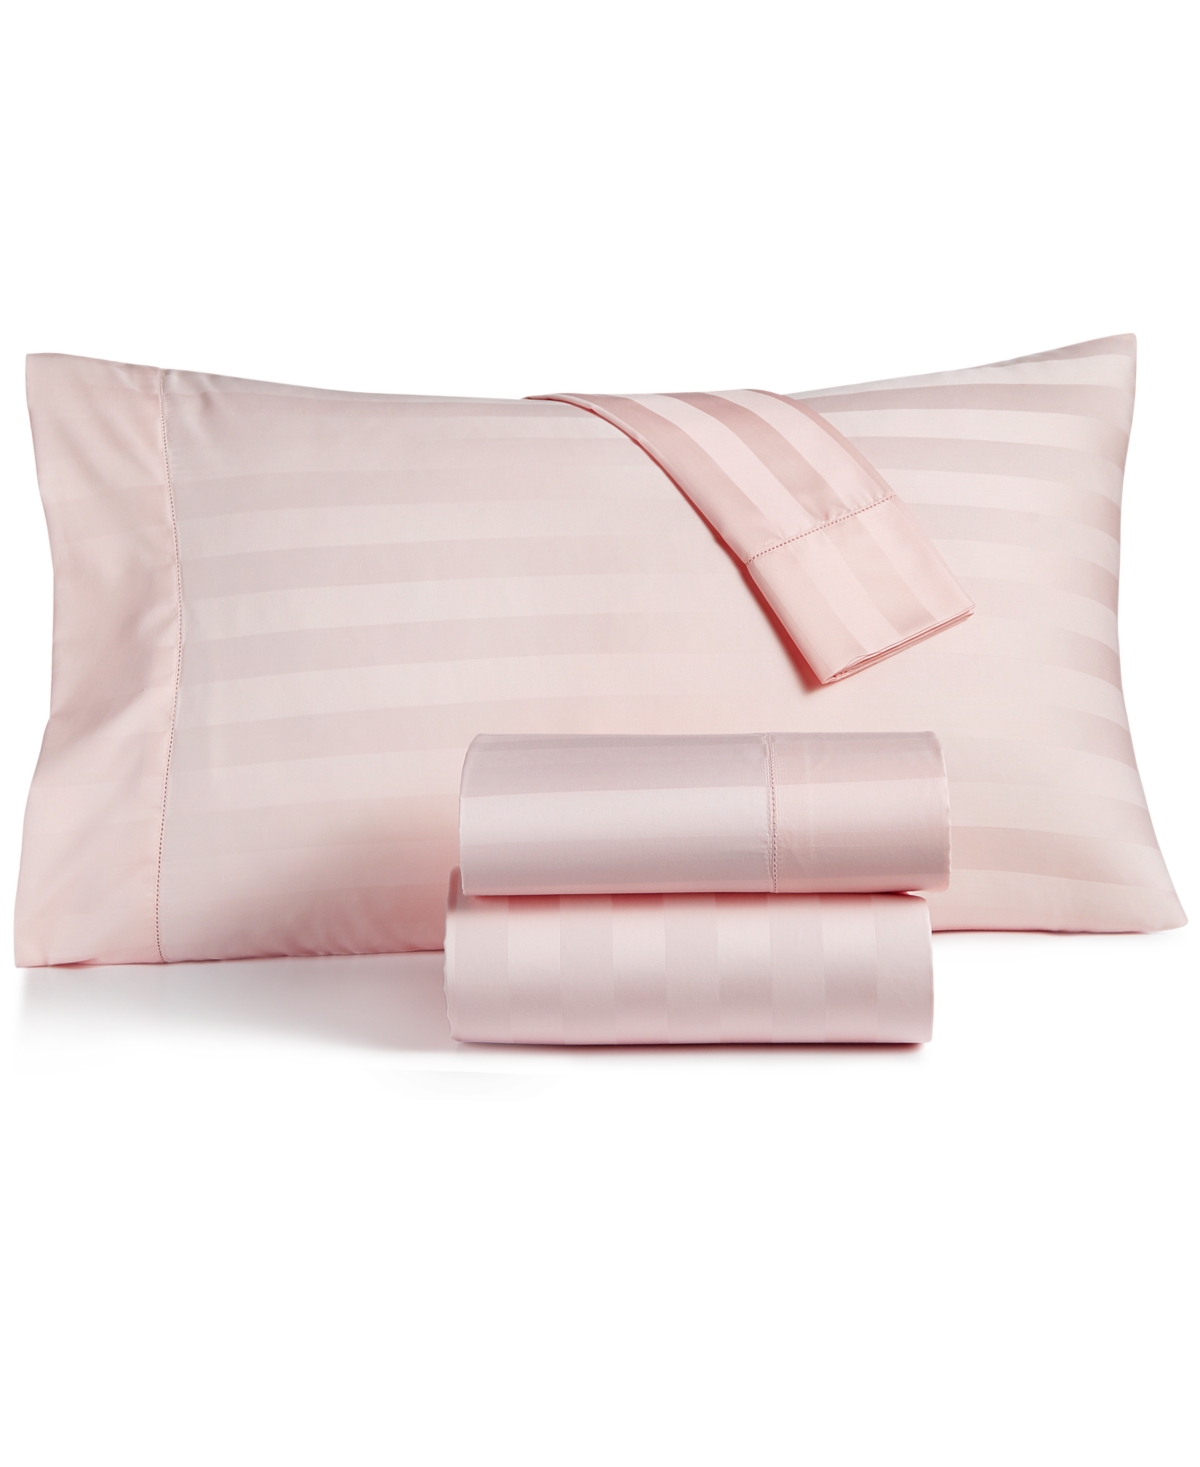 Charter Club Damask 1.5" Stripe 550 Thread Count 100% Cotton 3-pc. Sheet Set, Twin, Created For Macy's In Cotton Candy